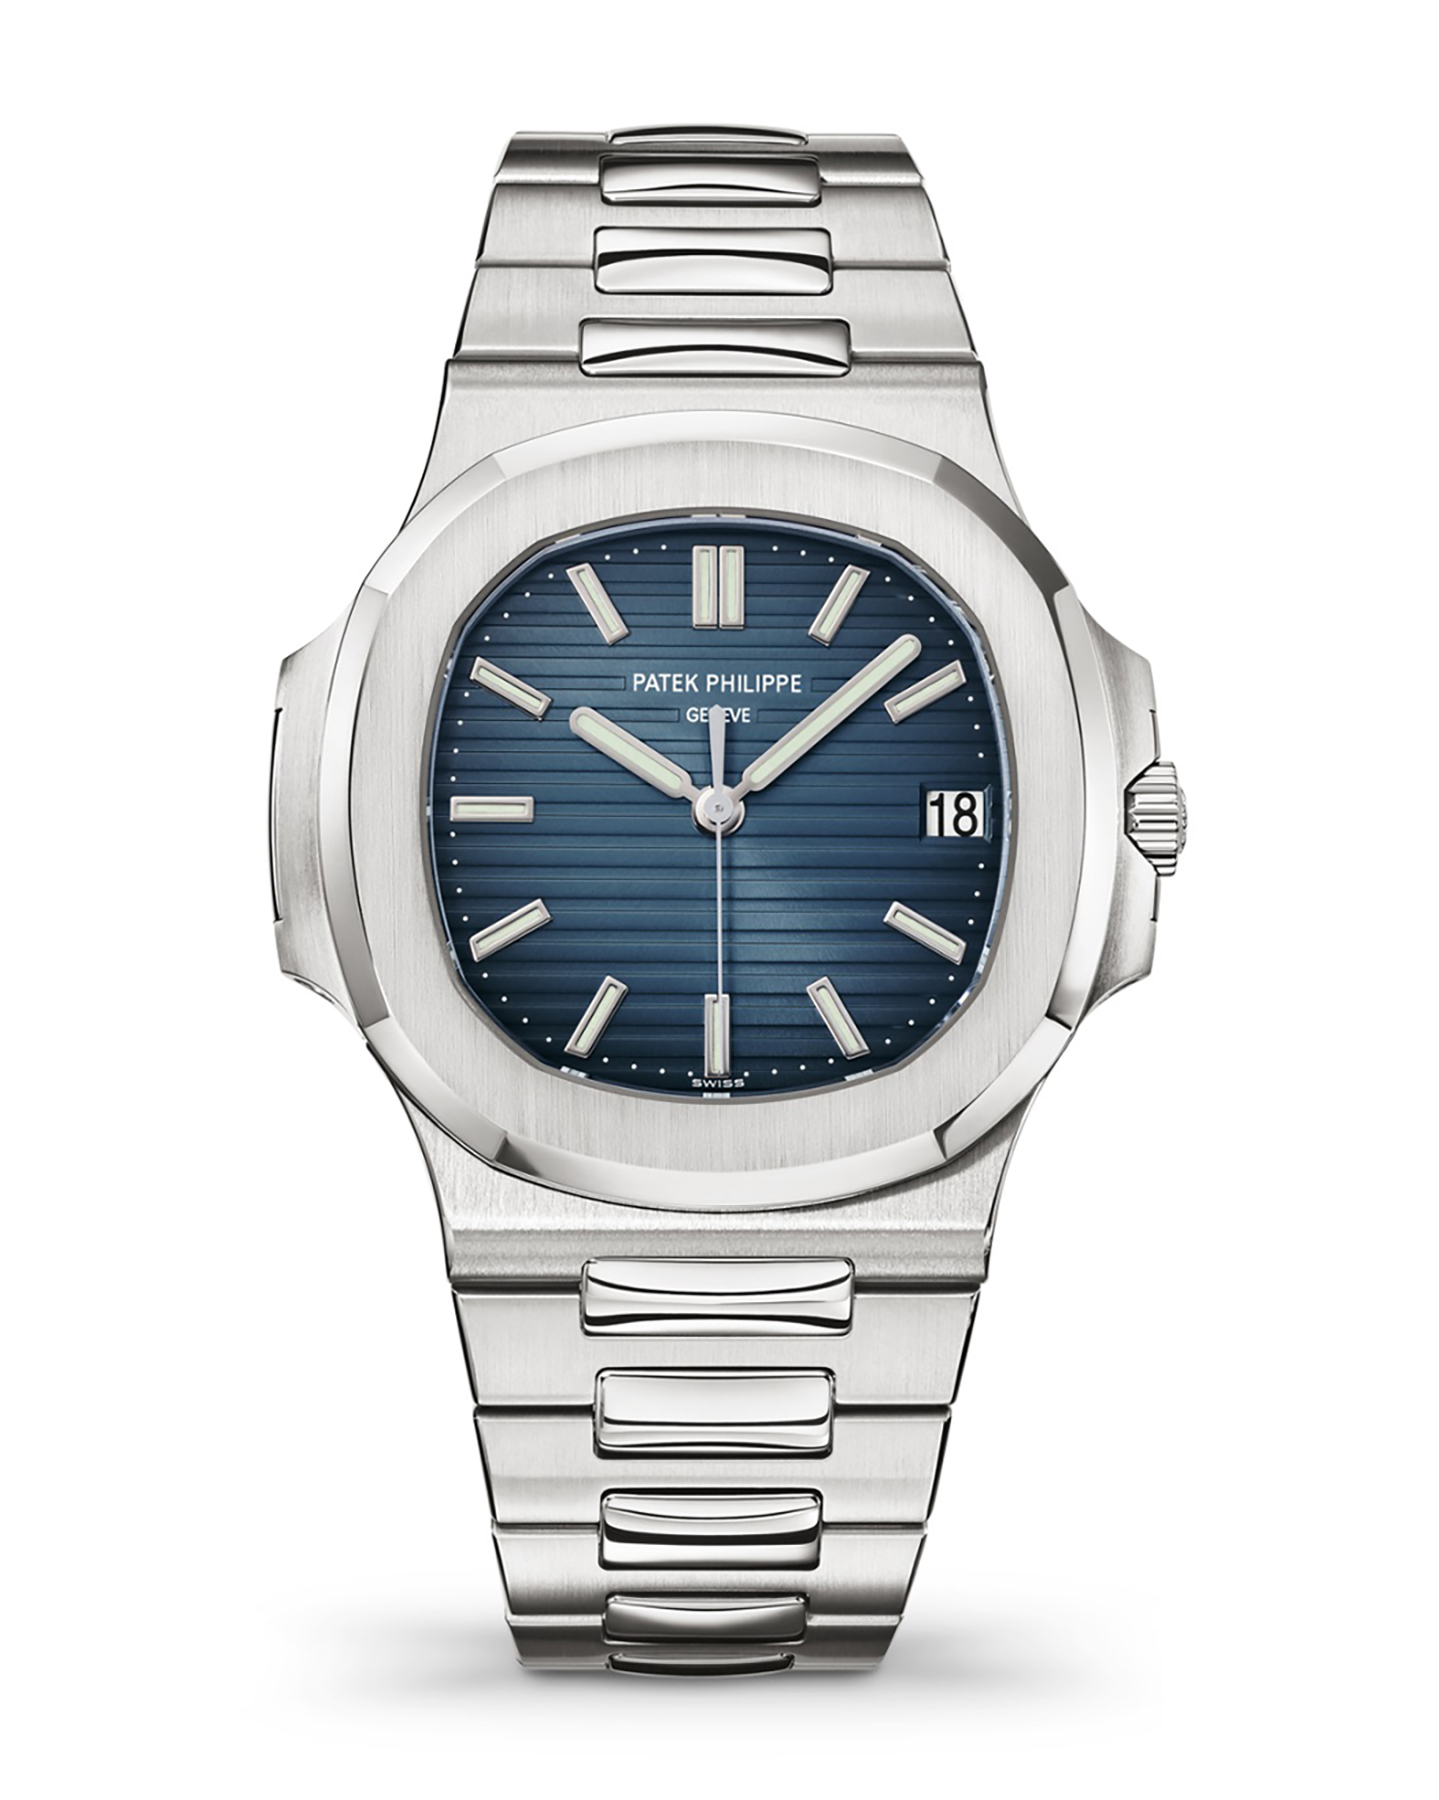 Expert Opinions: Why Patek Philippe Should Be in Your Collection